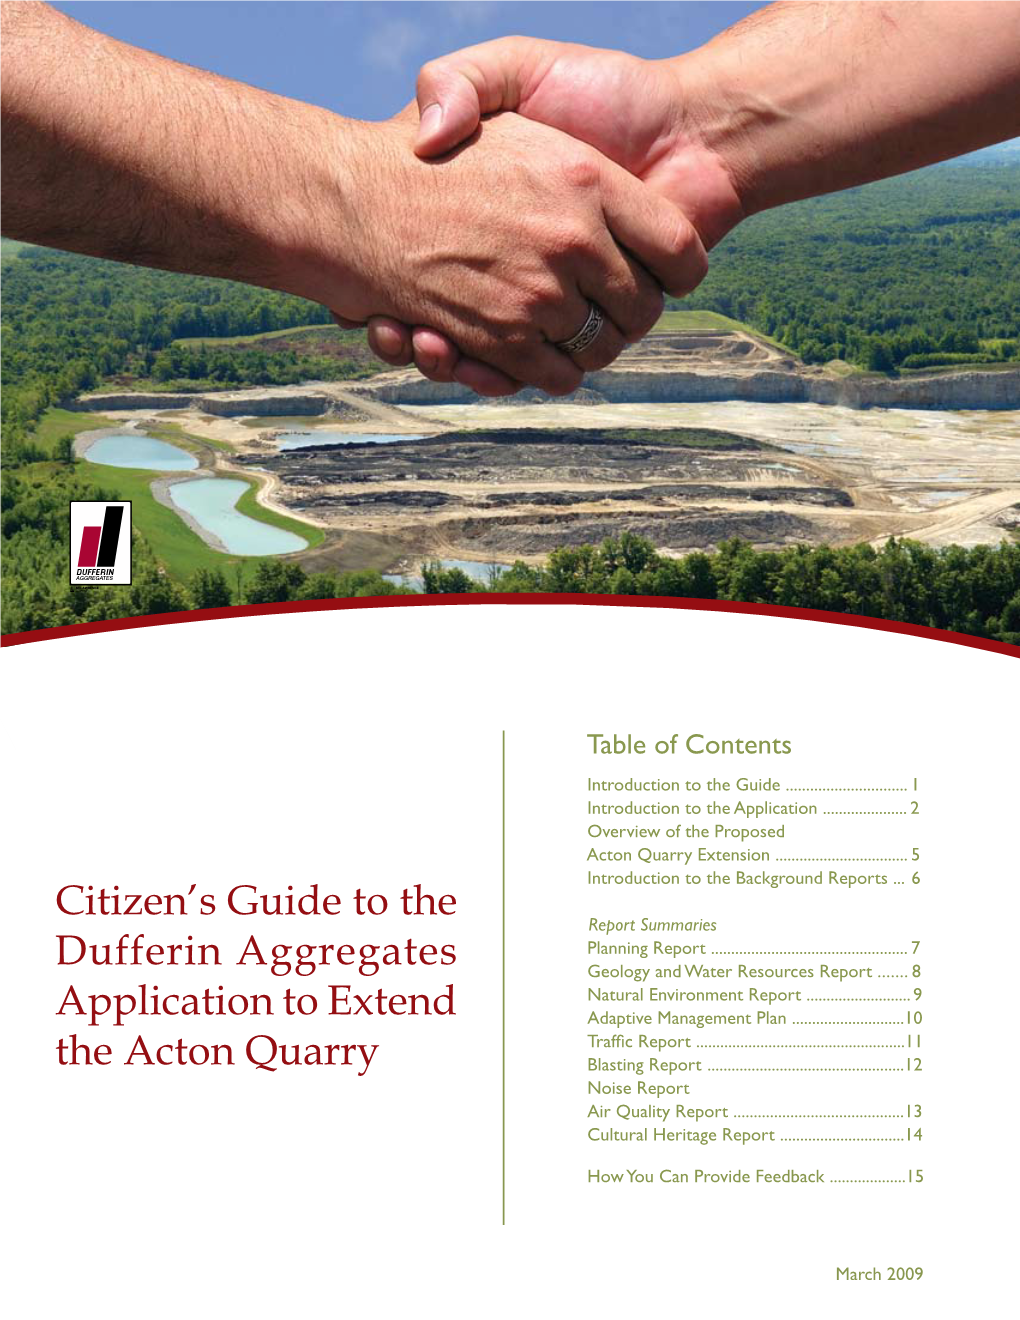 Citizen's Guide to the Dufferin Aggregates Application to Extend the Acton Quarry